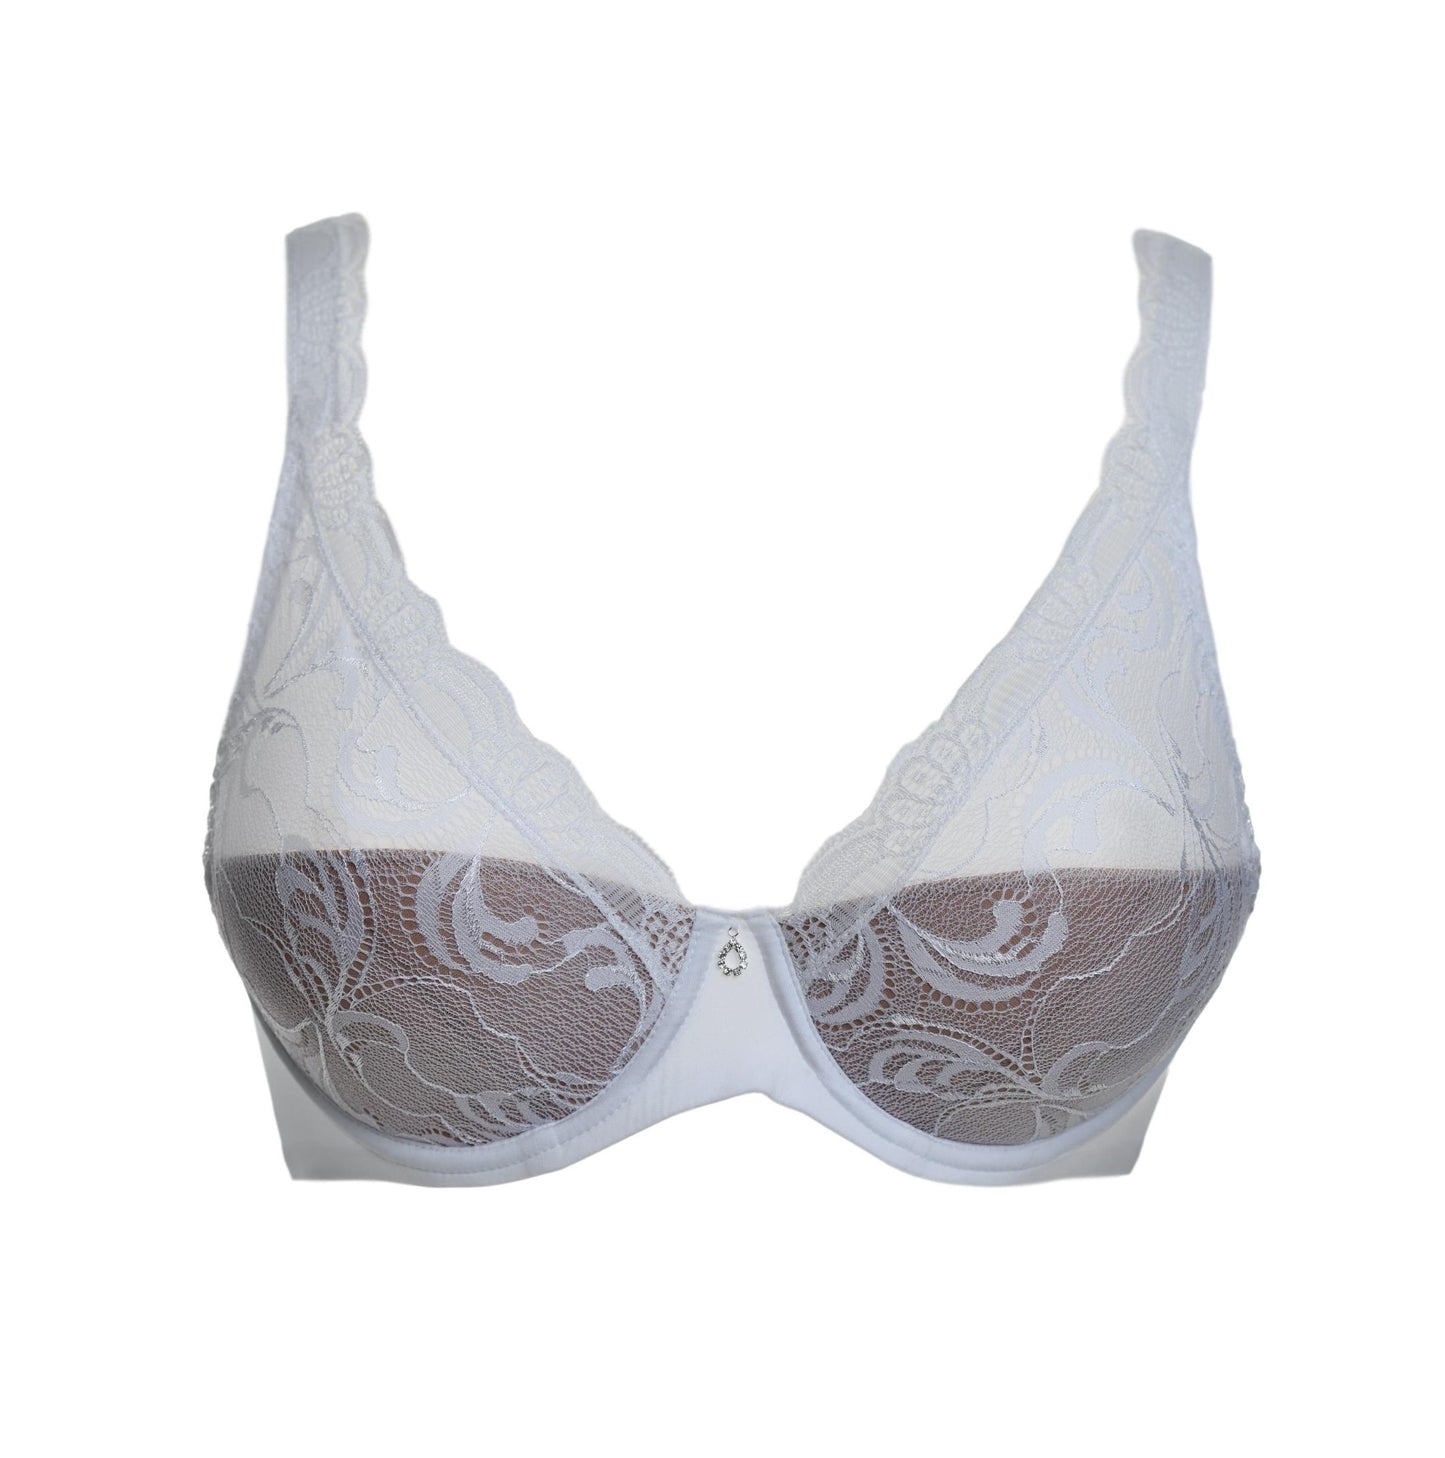 The Savoir Faire line from Leilieve features this lace bra for an ideal fit and comfort from its meticulous construction. The cups have been designed with light padding (about 2mm) attached only to the underwire and overlaid with Italian flat lace, detaching the cups for unrestricted movement while minimizing the fabric's transparency.